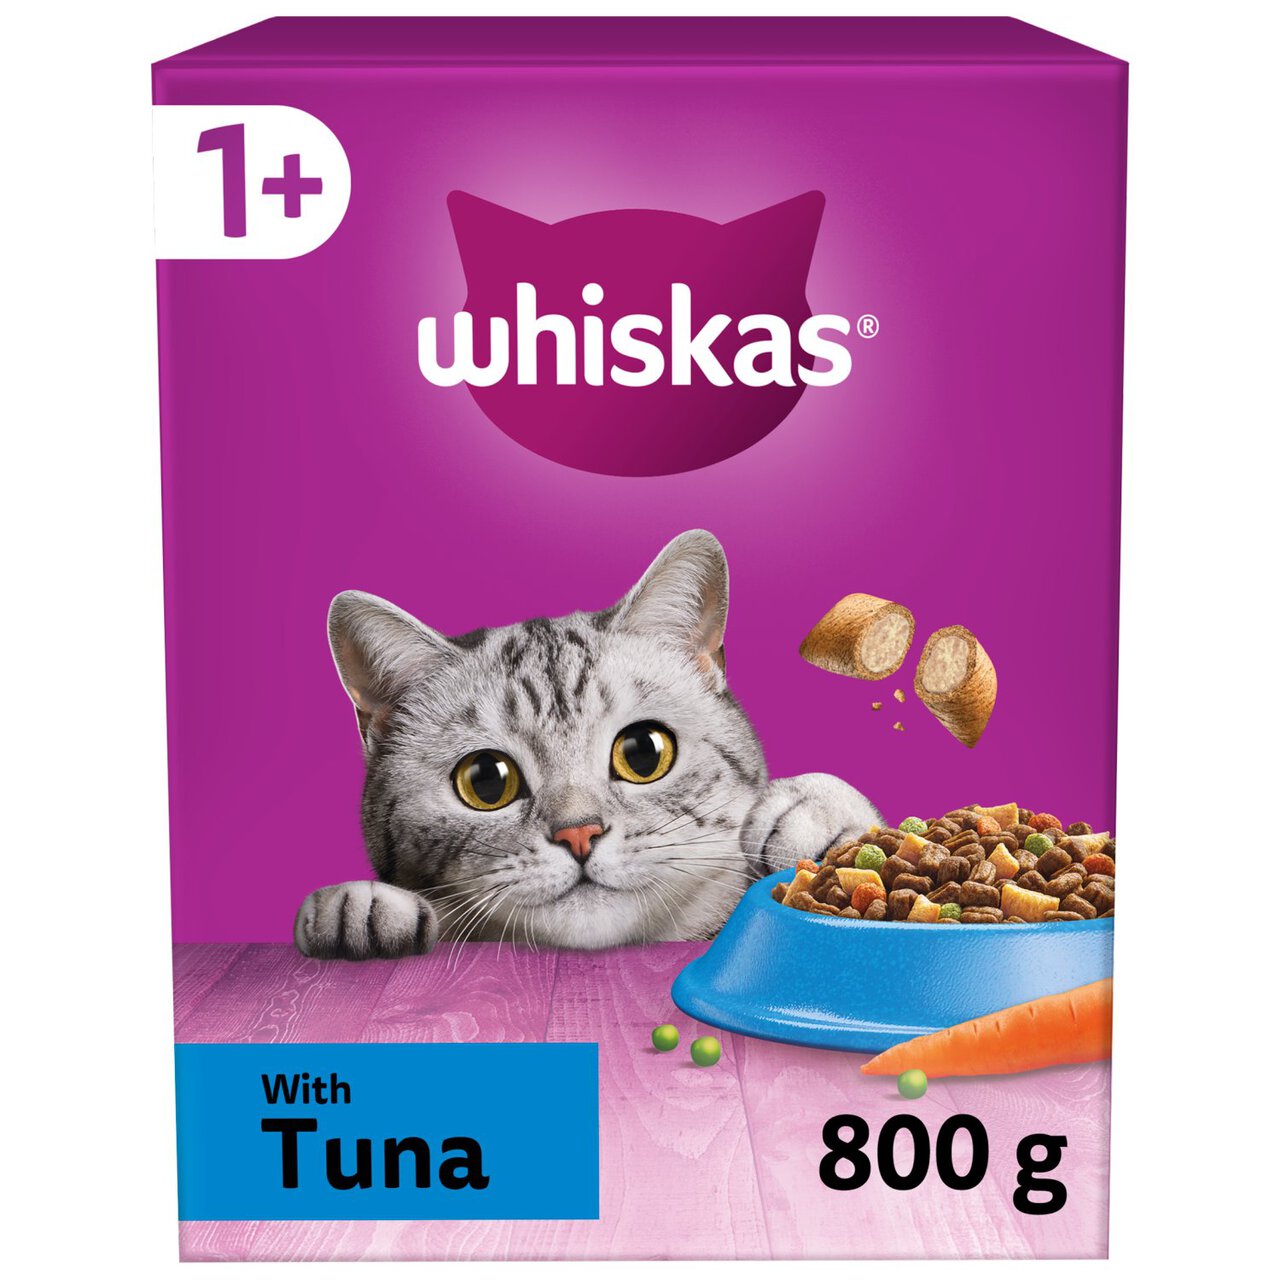 Whiskas 1+ Adult Dry Cat Food with Tuna 800g